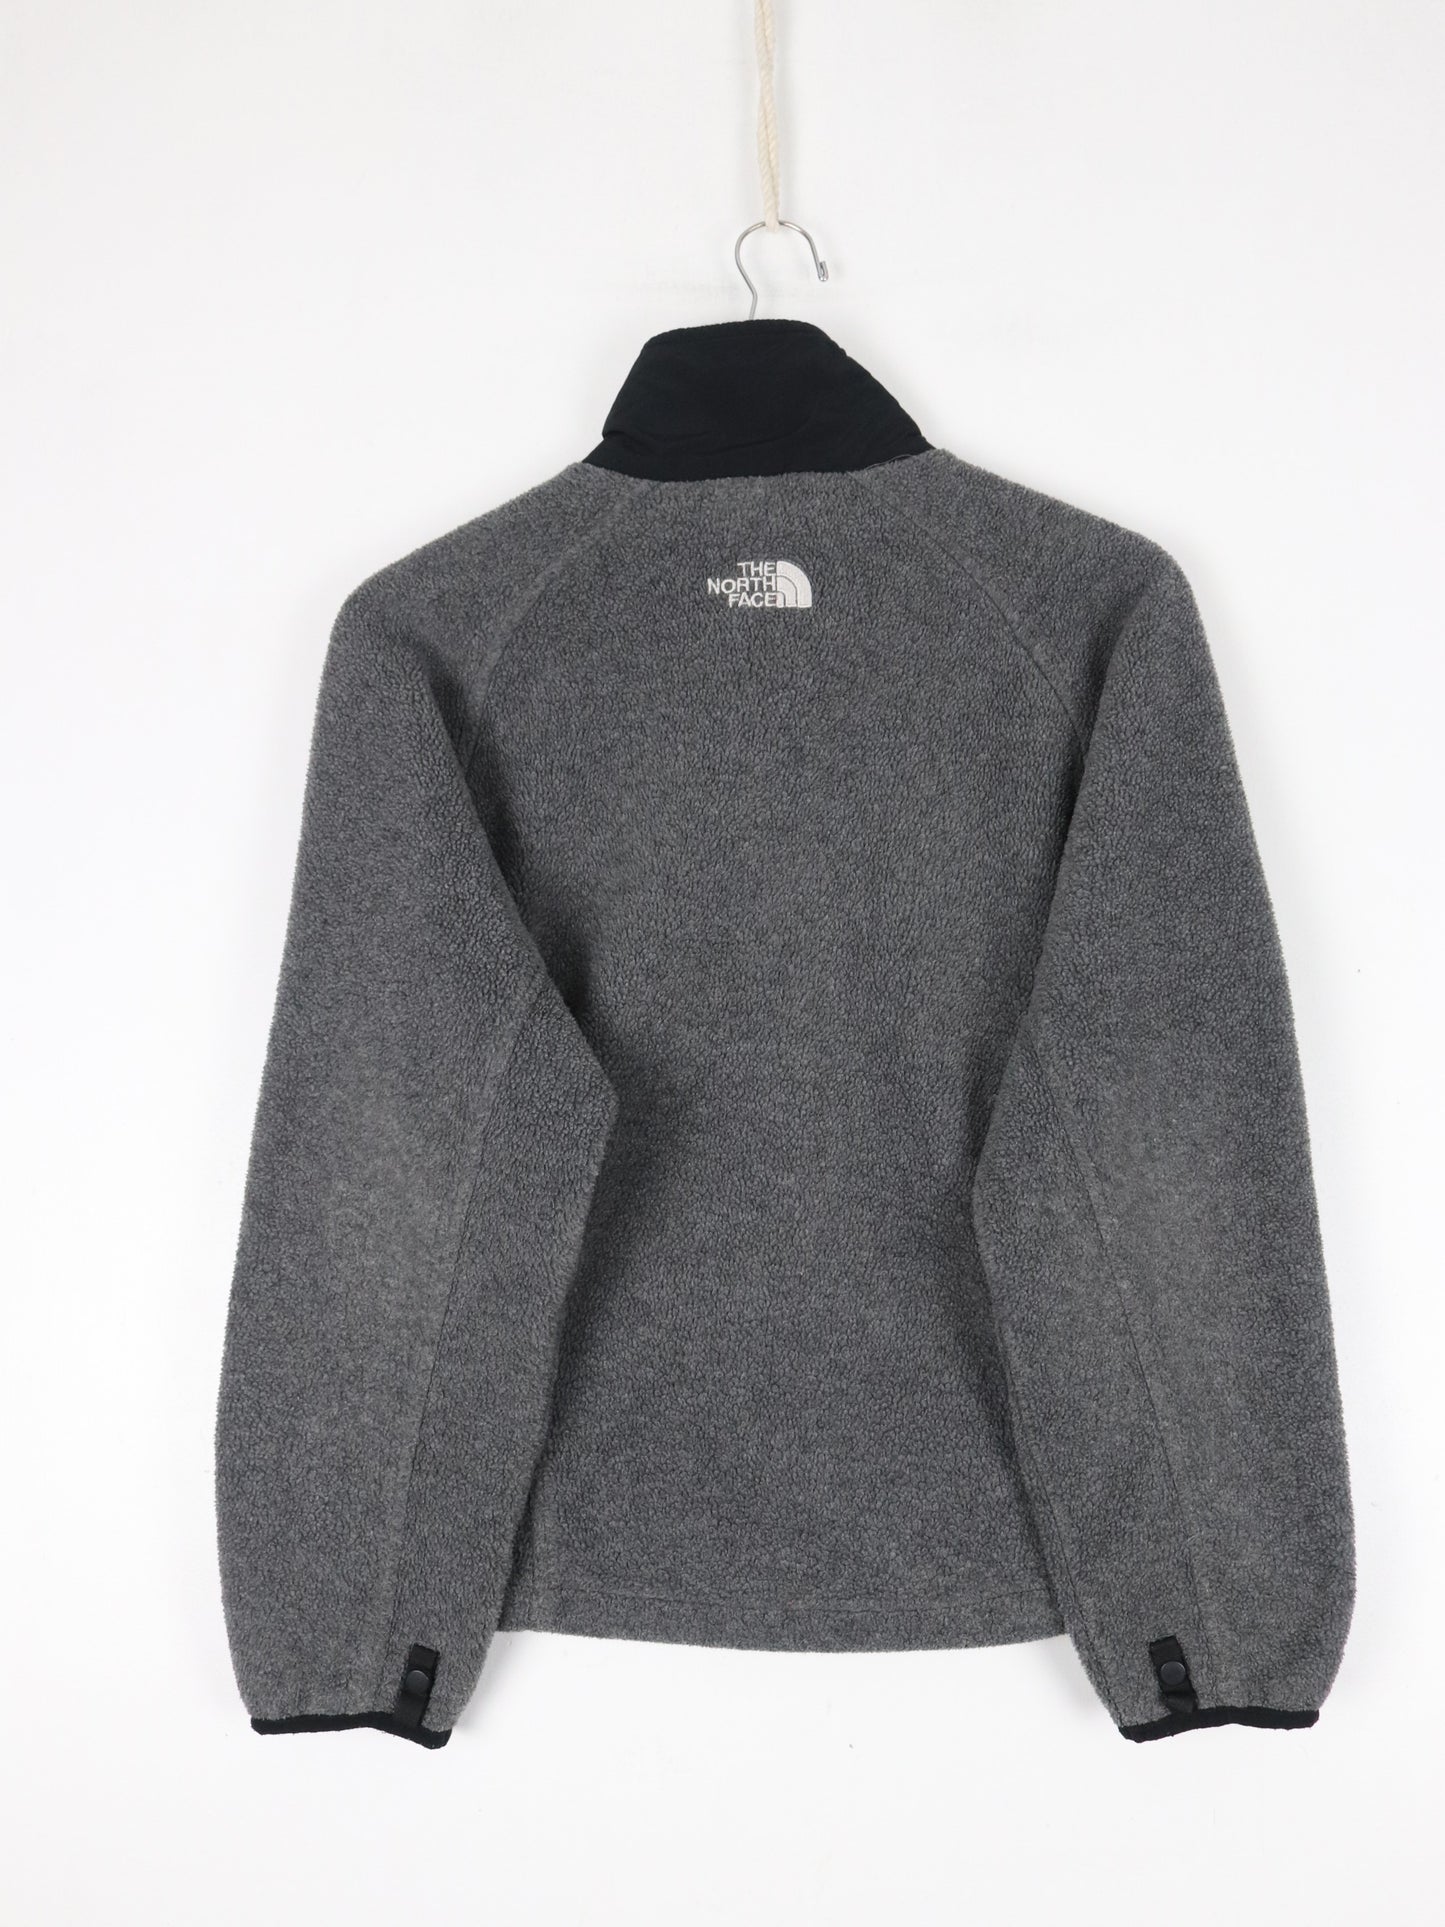 Vintage The North Face Sweater Womens Small Grey Fleece Full Zip